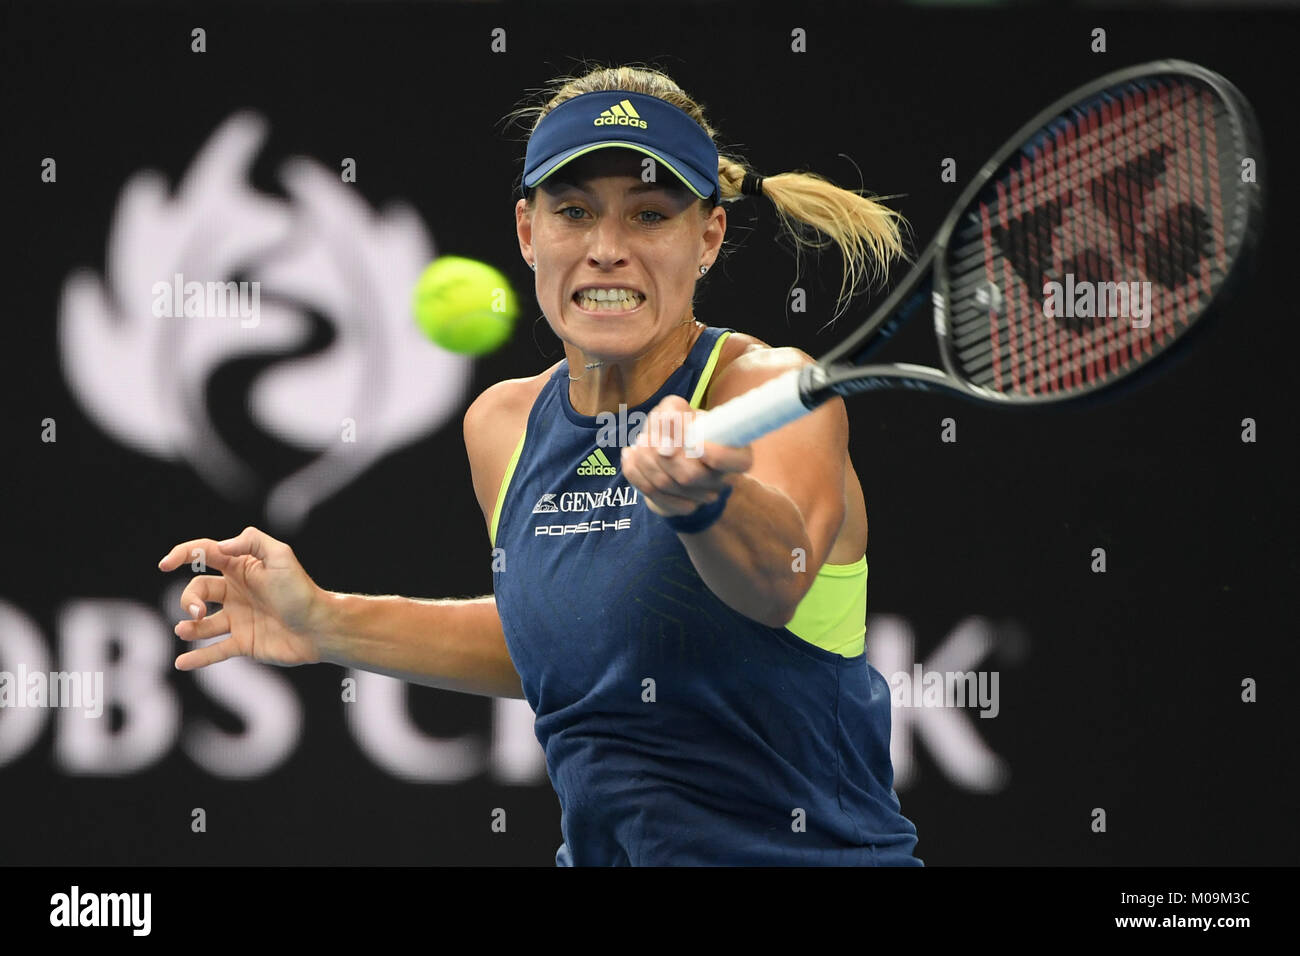 Melbourne, Australia. 20th Jan, 2018. 21st seed Angelique Kerber of Germany in action against Maria Sharapova of Russia in a 3rd round match on day six of the 2018 Australian Open Grand Slam tennis tournament in Melbourne, Australia. Kerber won 61 63. Credit: Cal Sport Media/Alamy Live News Stock Photo